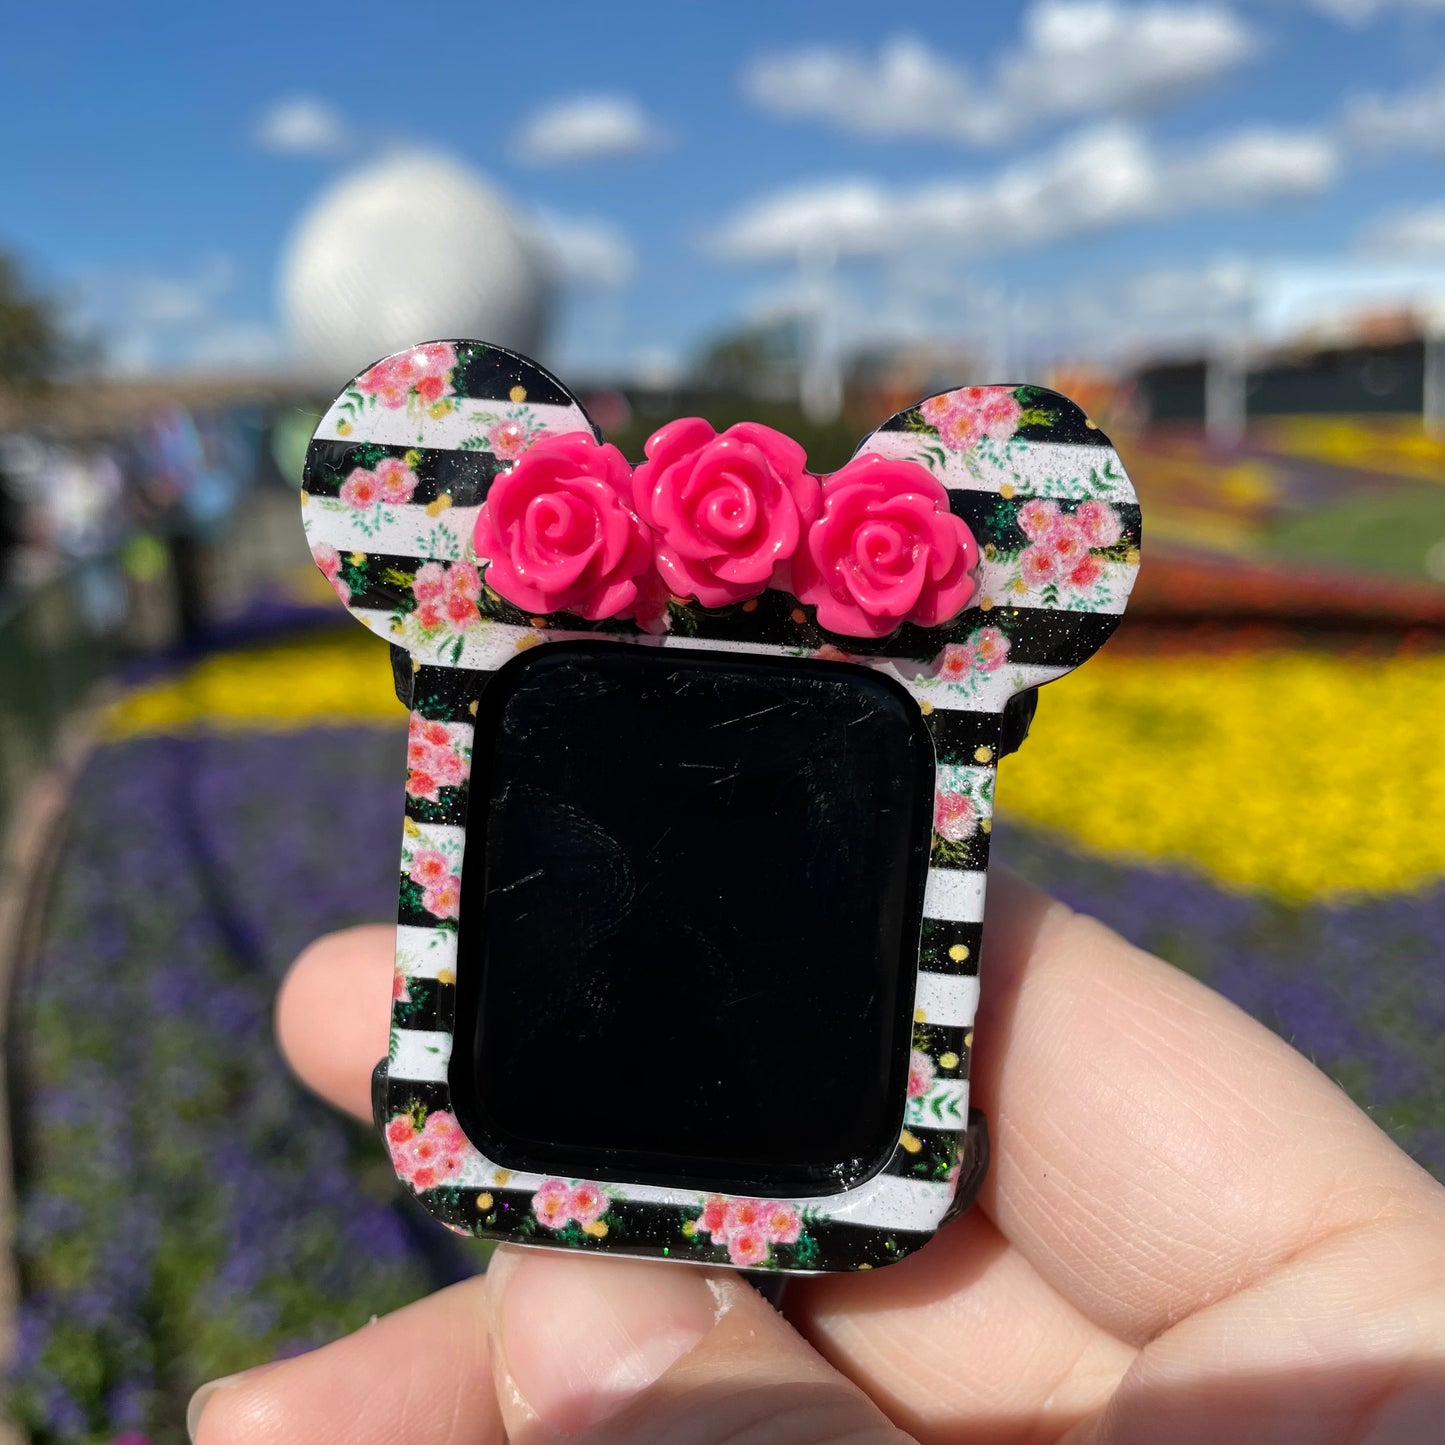 Striped Flower and Garden Watch Covers